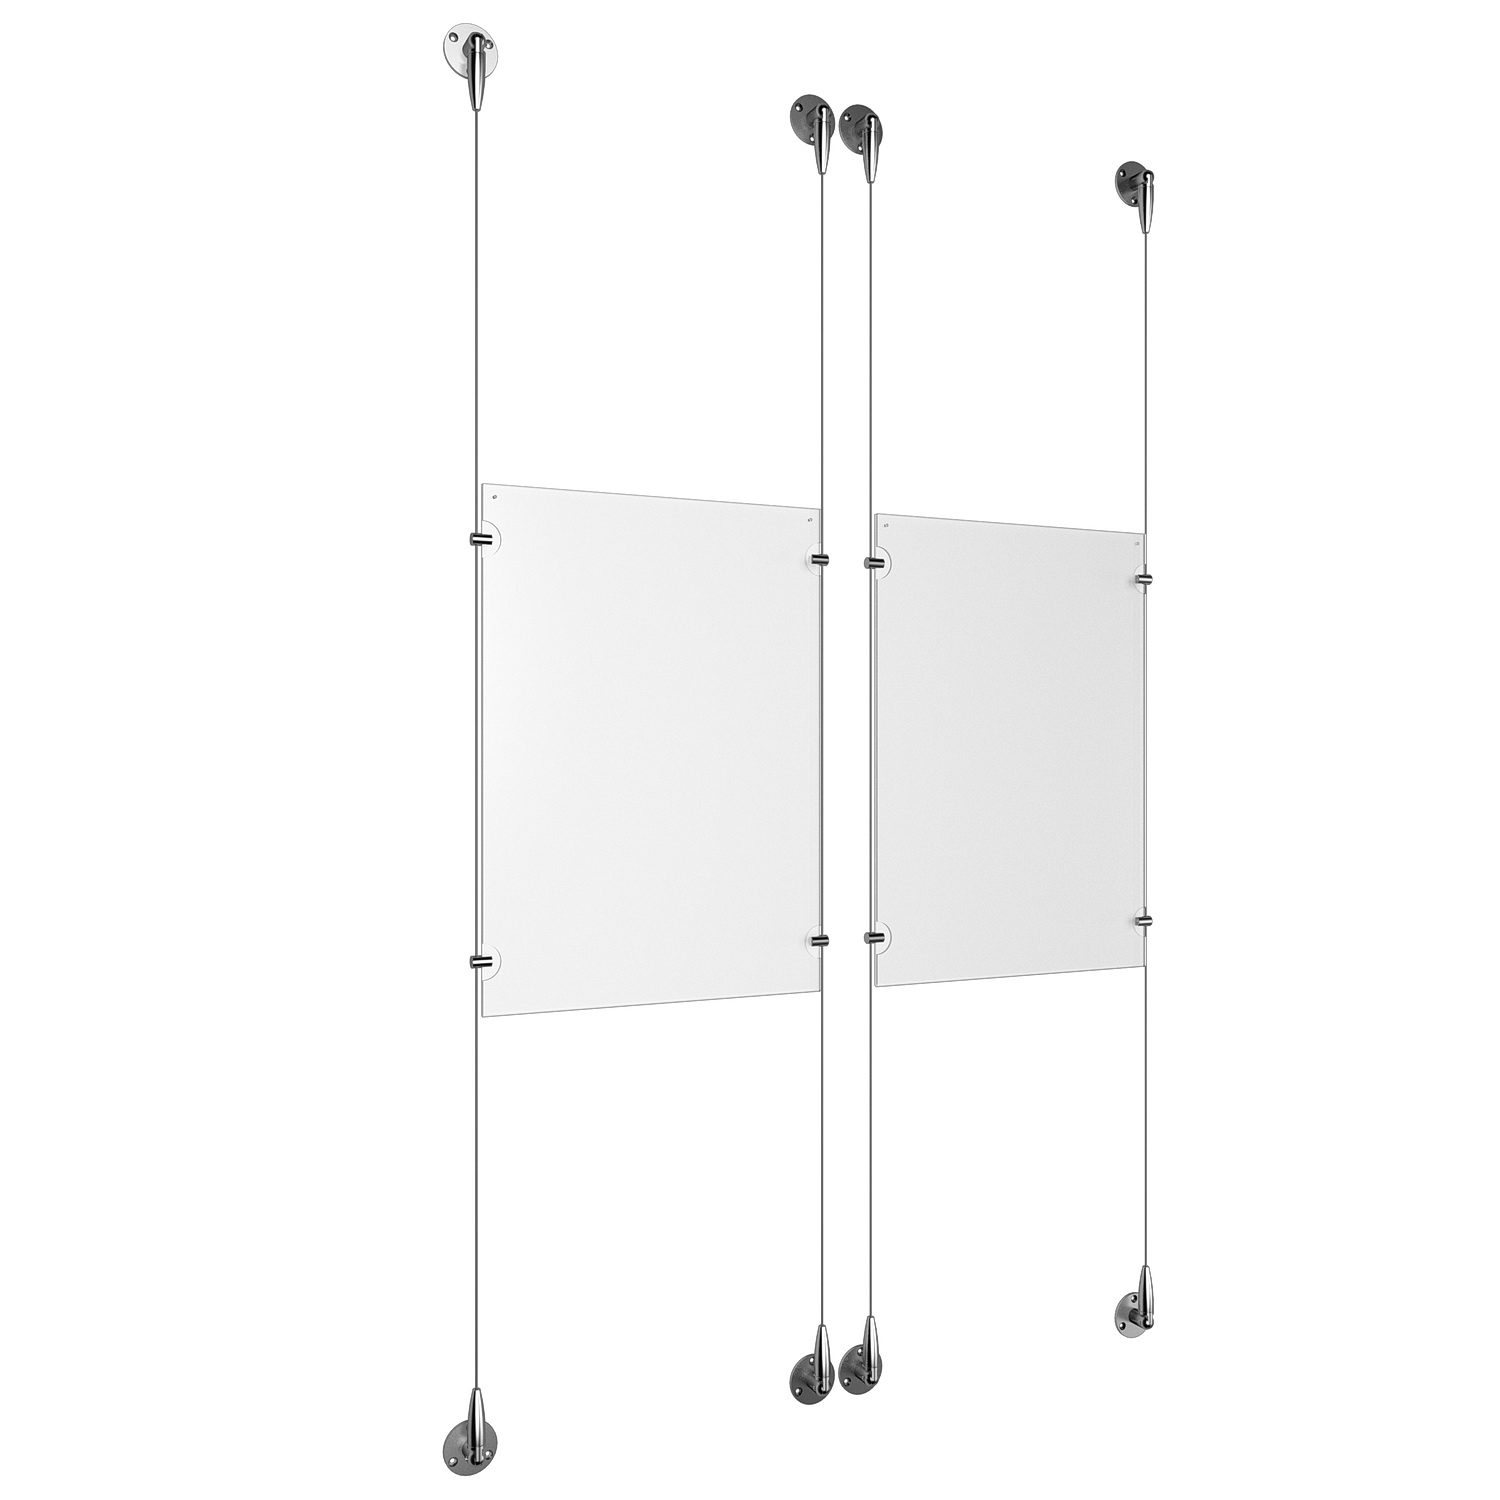 (2) 11'' Width x 17'' Height Clear Acrylic Frame & (4) Aluminum Chrome Polished Adjustable Angle Signature Cable Systems with (8) Single-Sided Panel Grippers